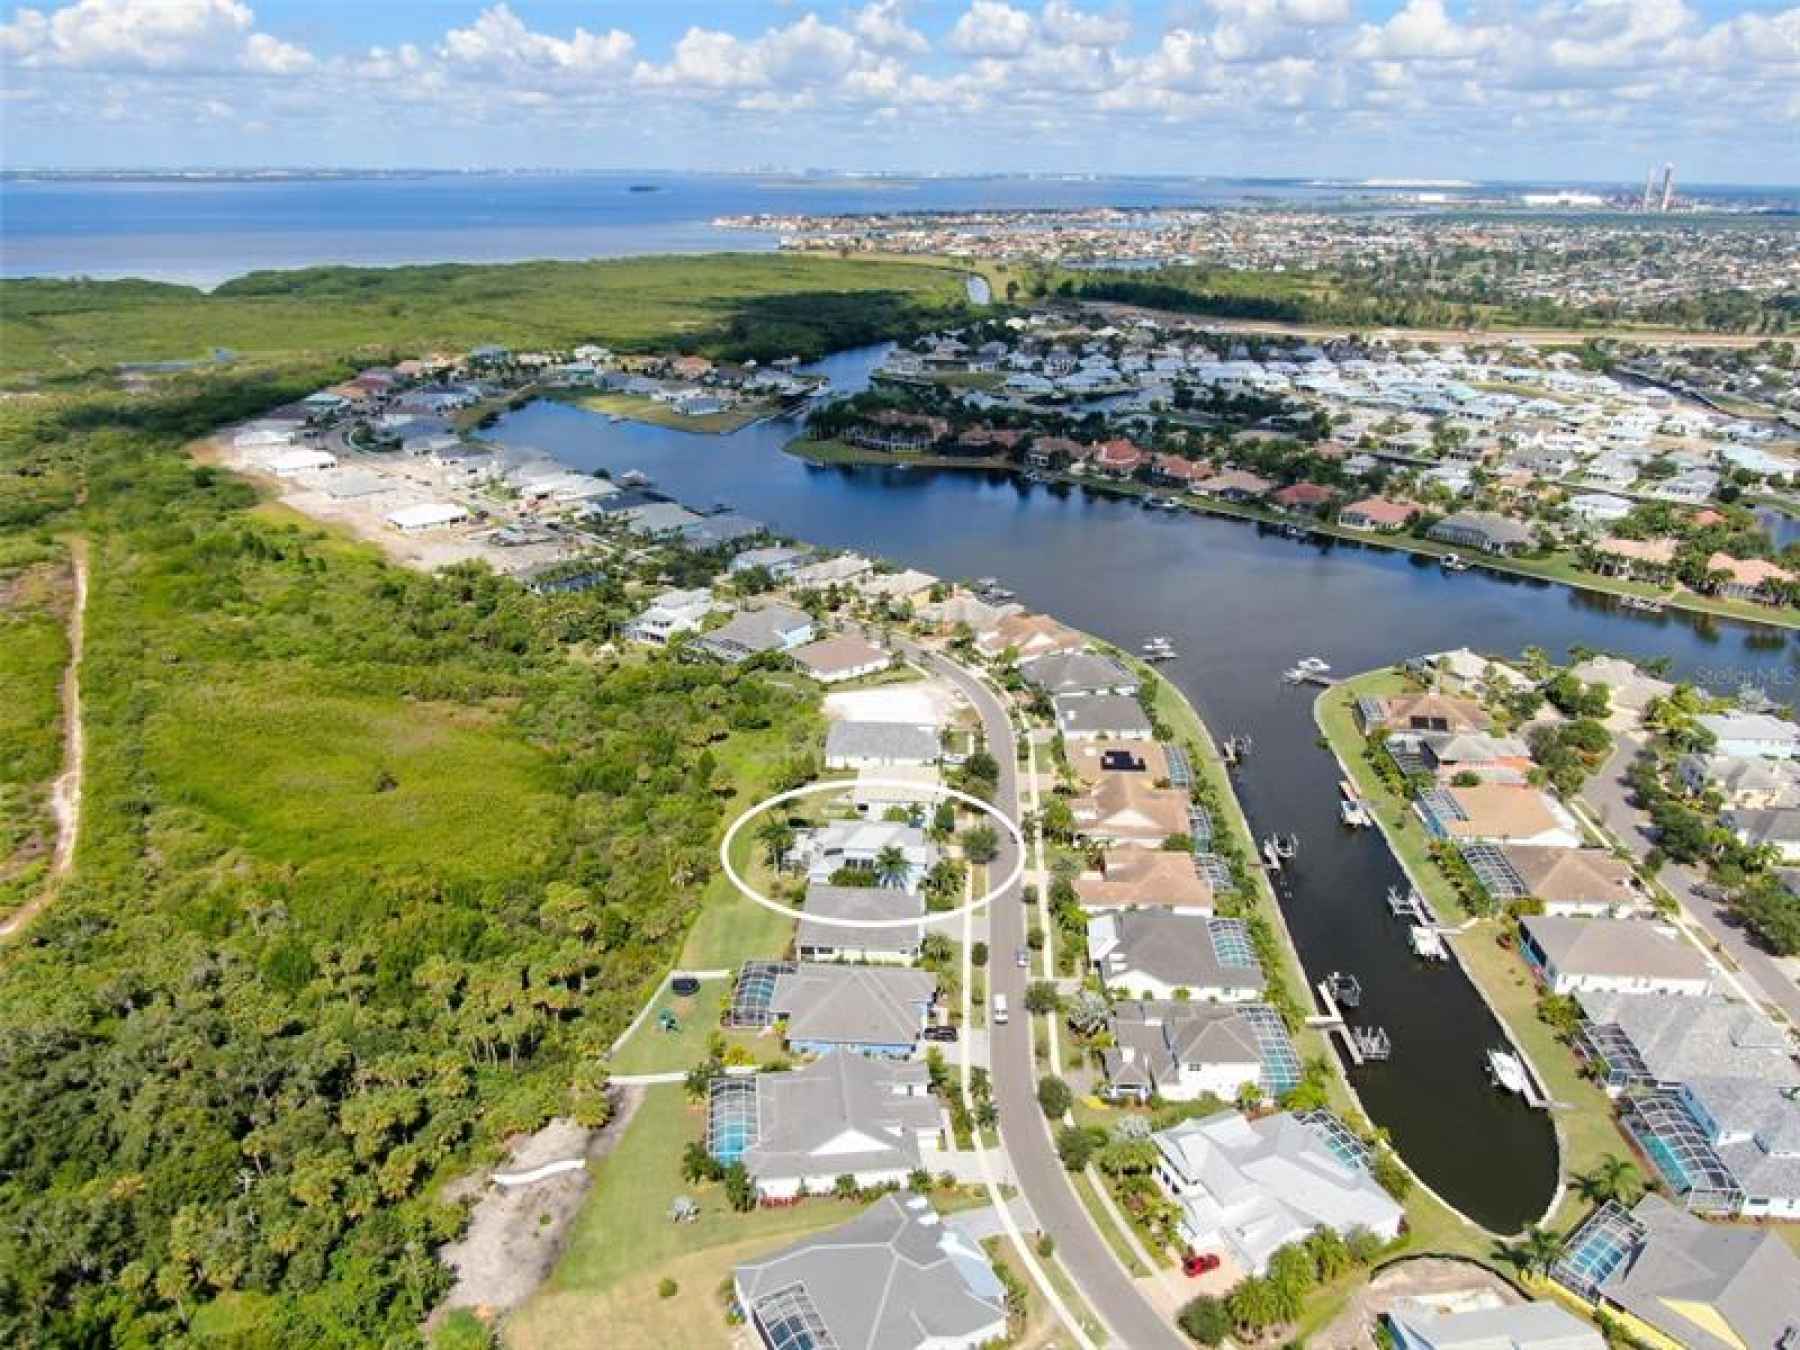 MiraBay on Manns Harbor Drive is an incredible place to live.  You will be living in a well maintain